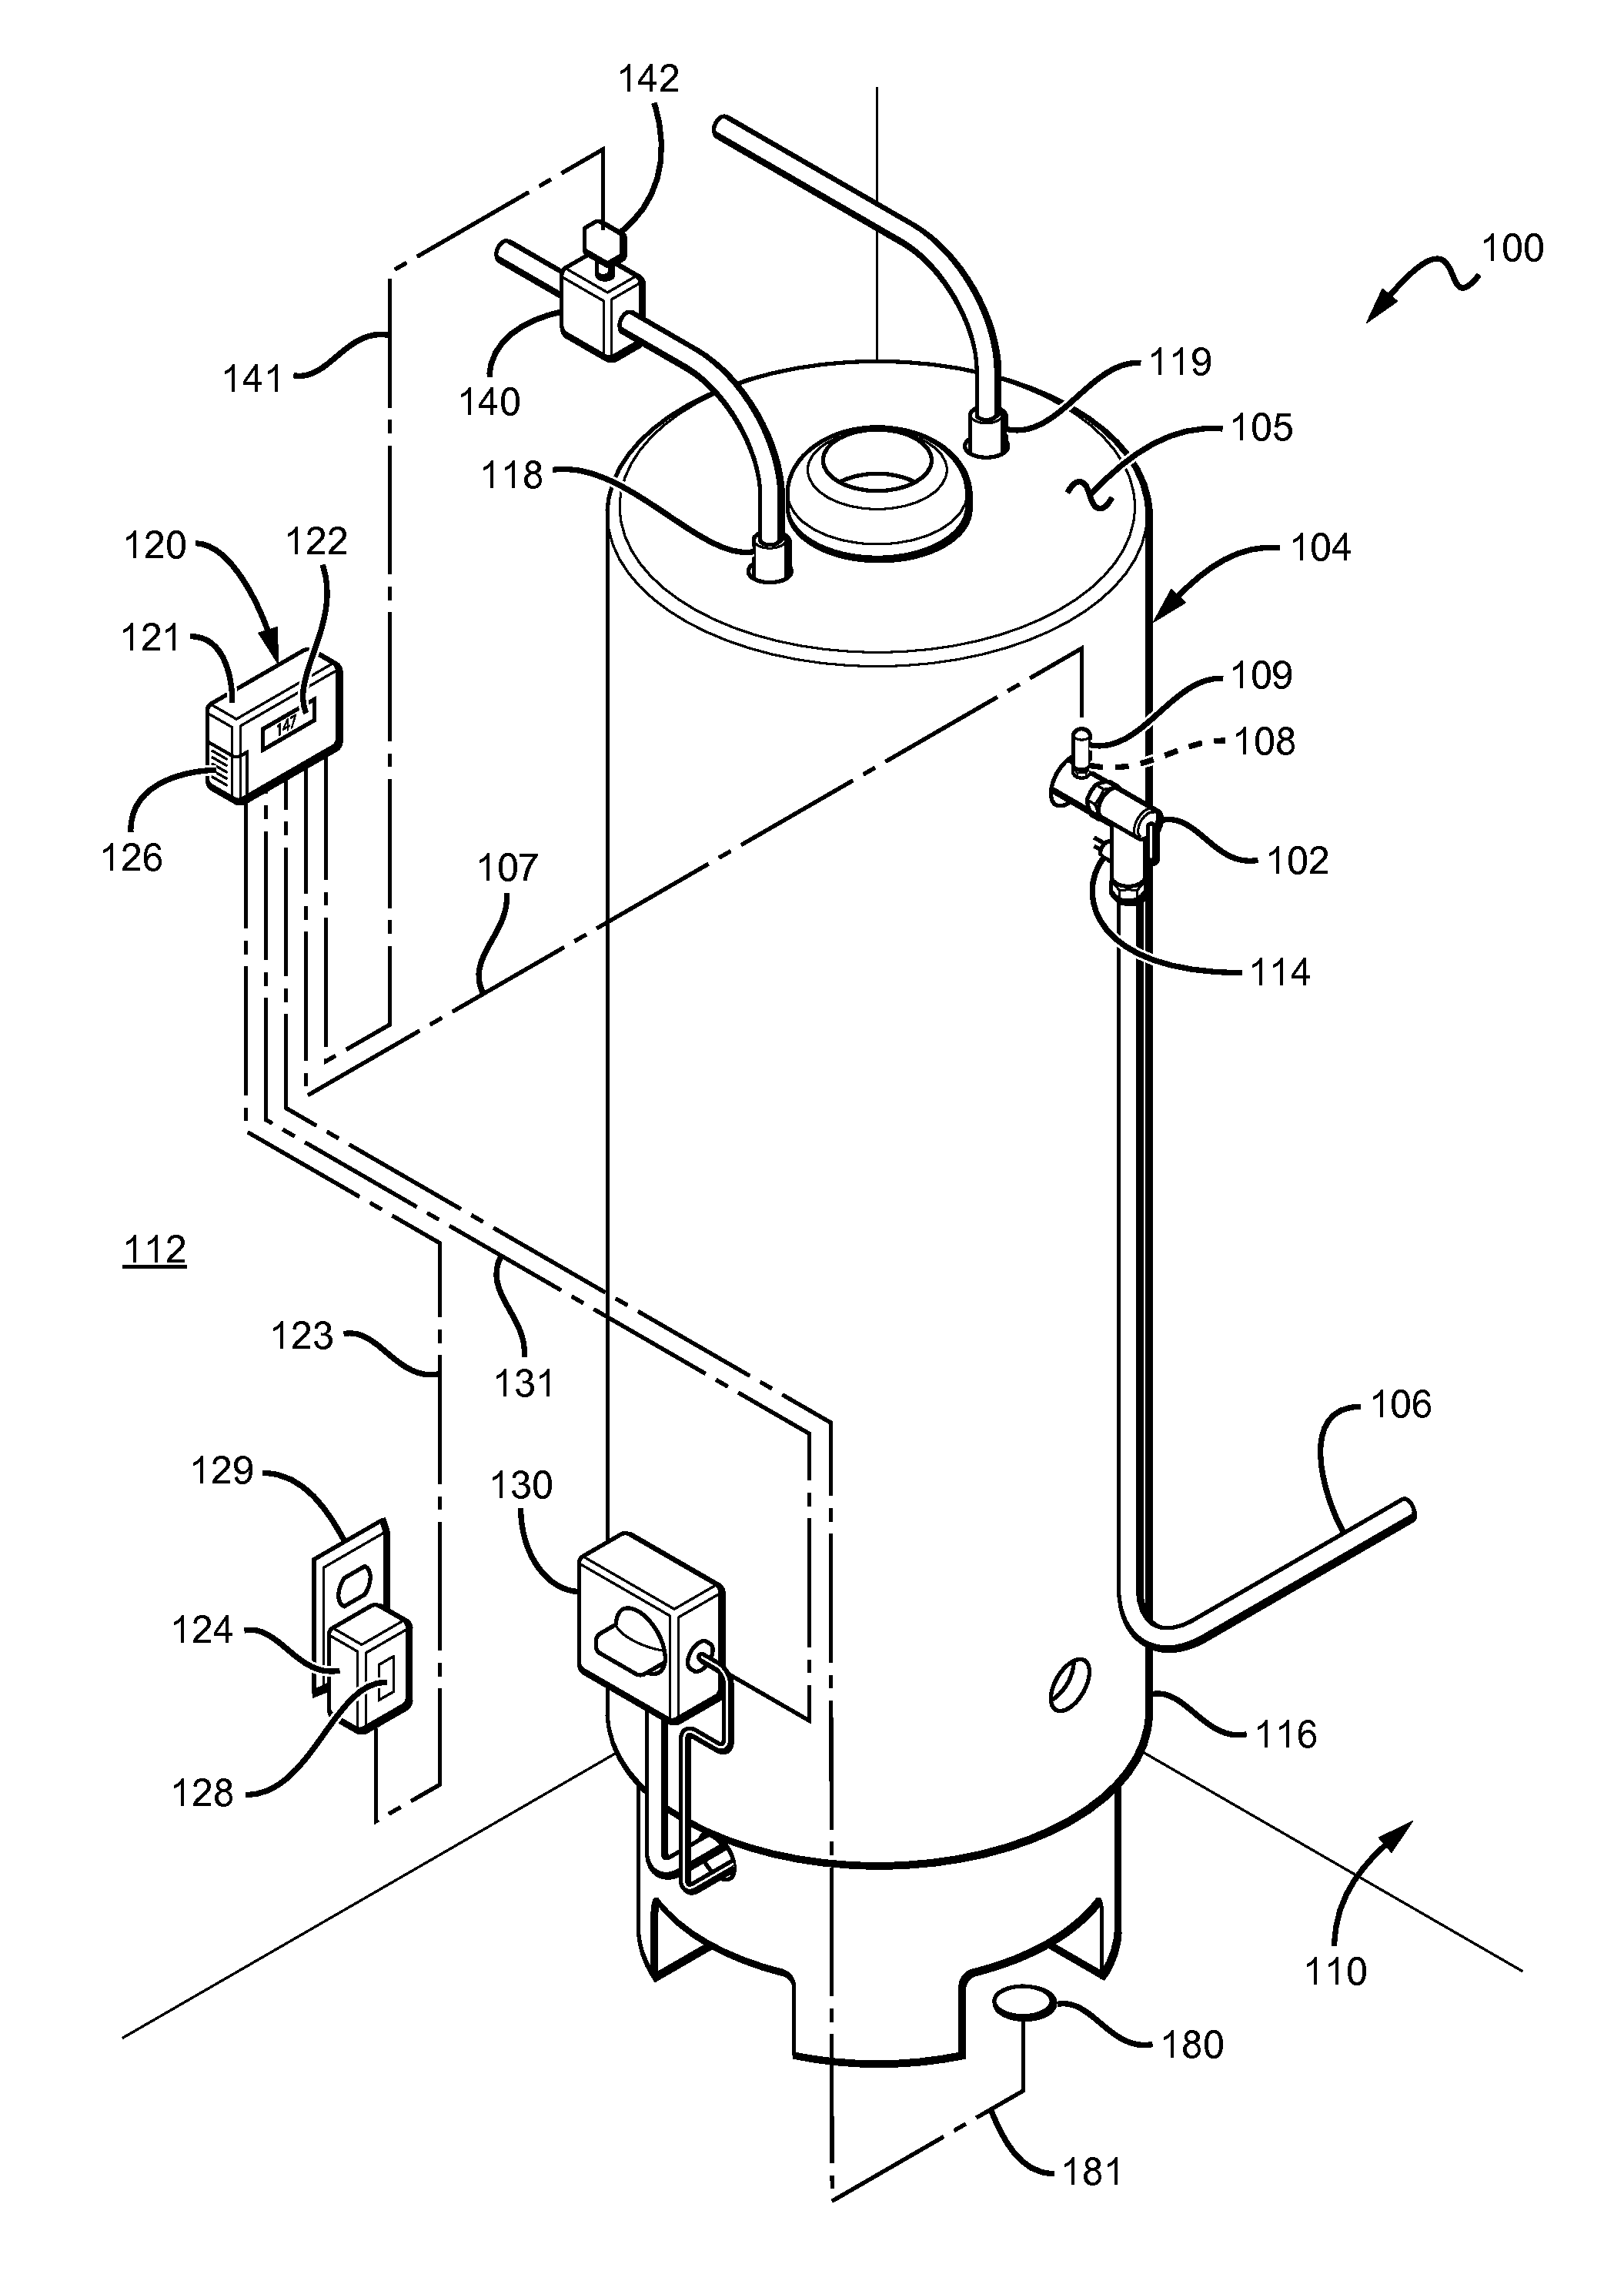 Systems & Methods For Monitoring And Controlling Water Consumption